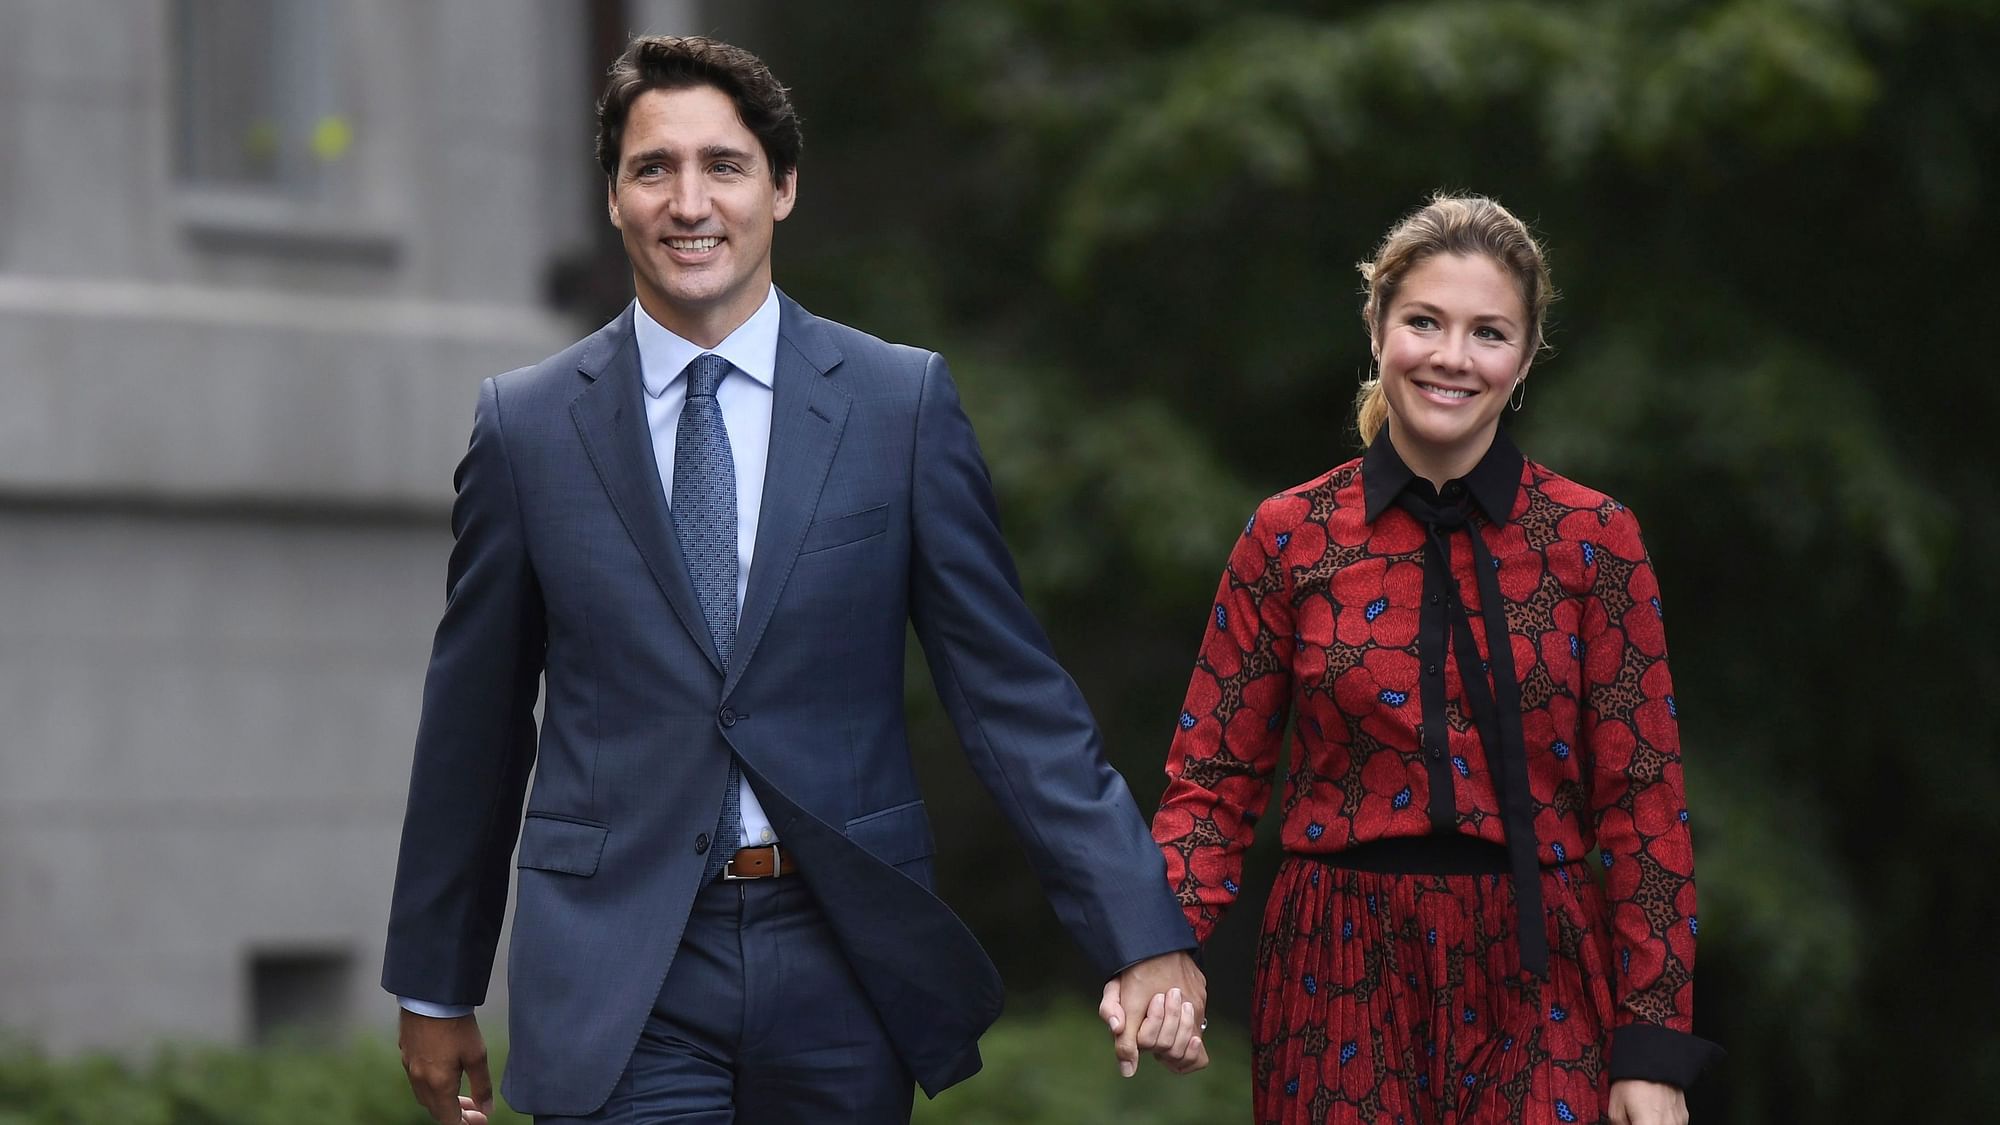 File image of Canadian Prime Minister Justin Trudeau along with his wife Sophie Grégoire Trudeau.